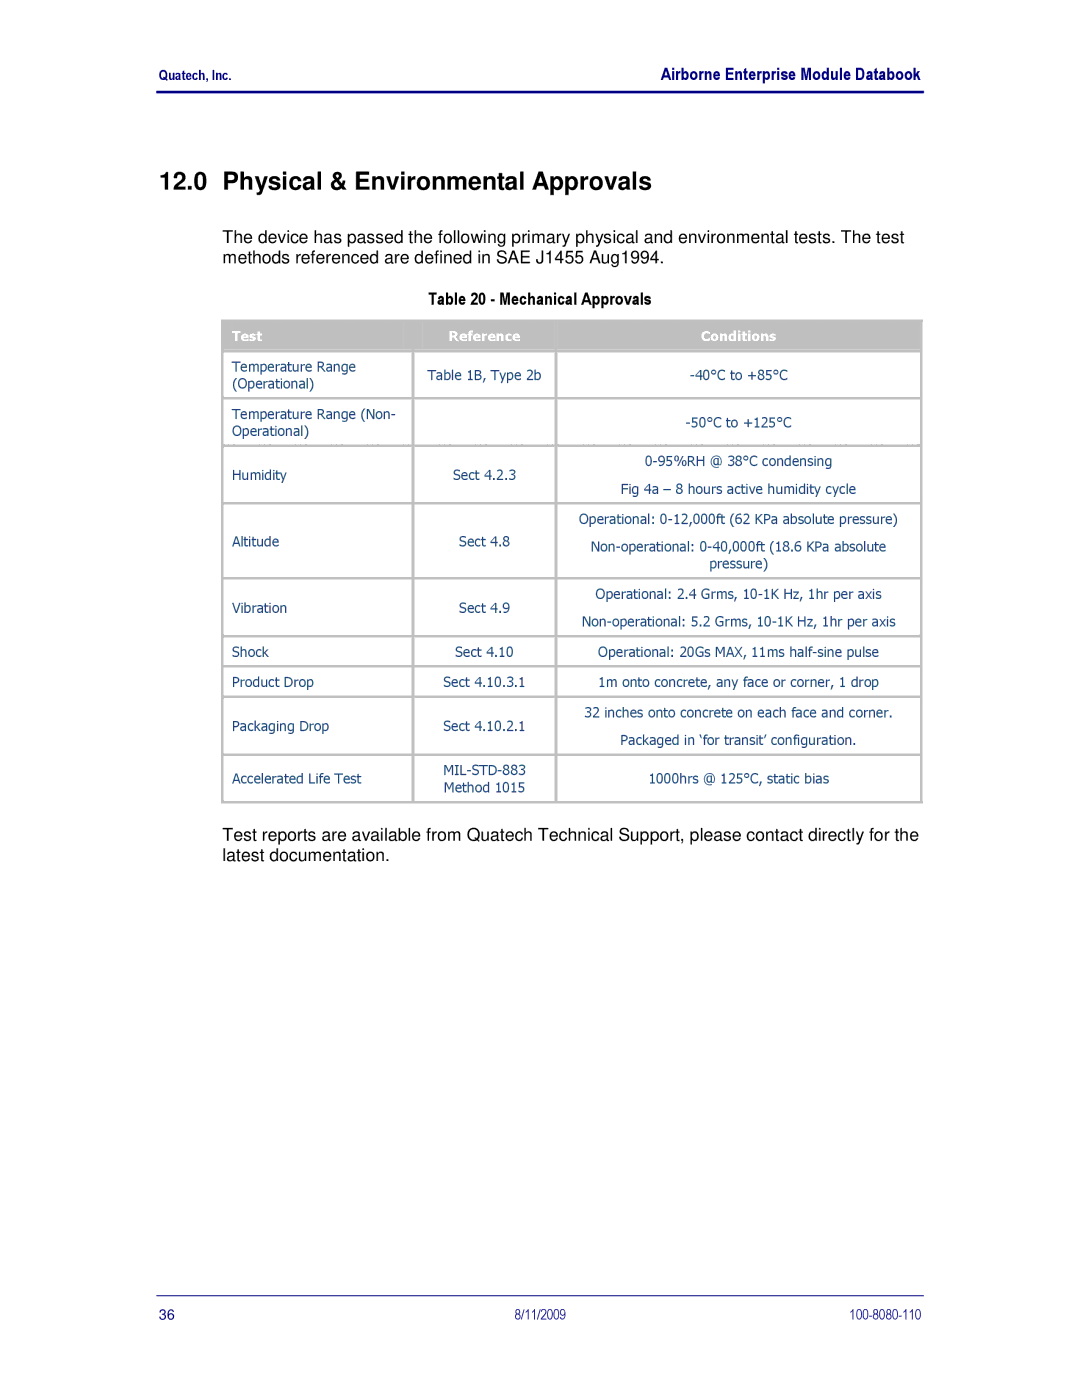 Quatech 802.11B/G manual Physical & Environmental Approvals, Mechanical Approvals, Test Reference Conditions 